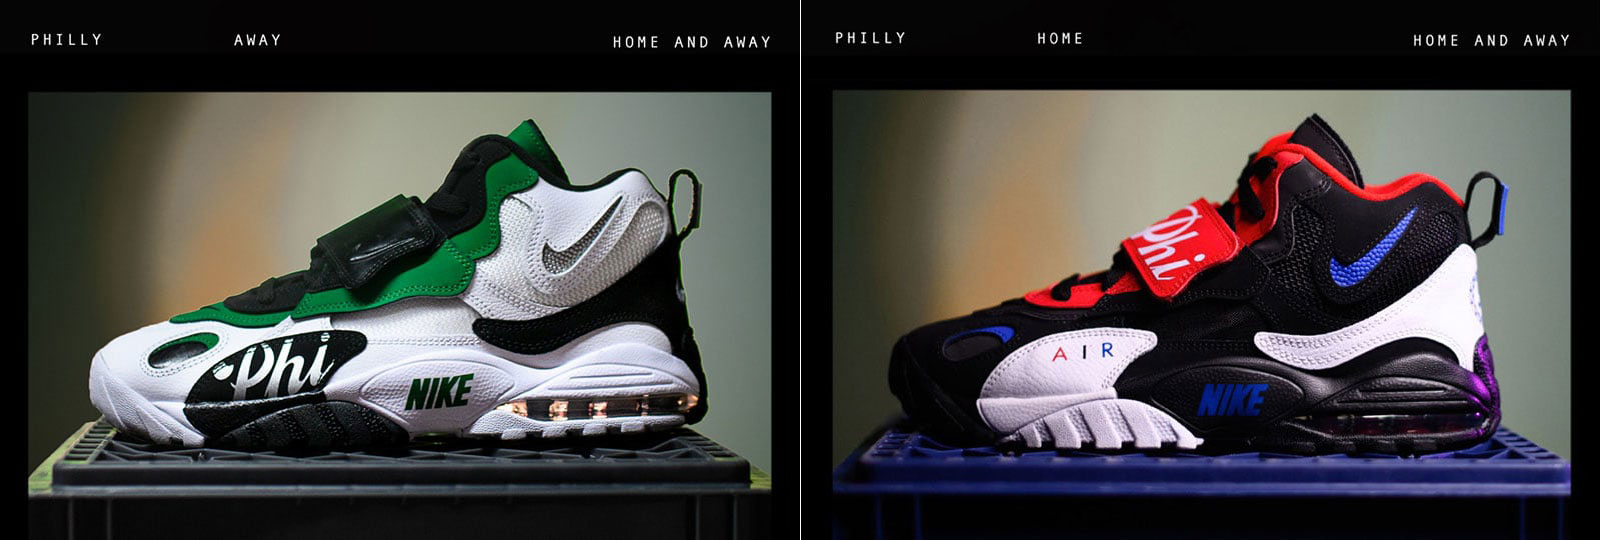 nike-philadelphia-philly-home-and-away-shoes